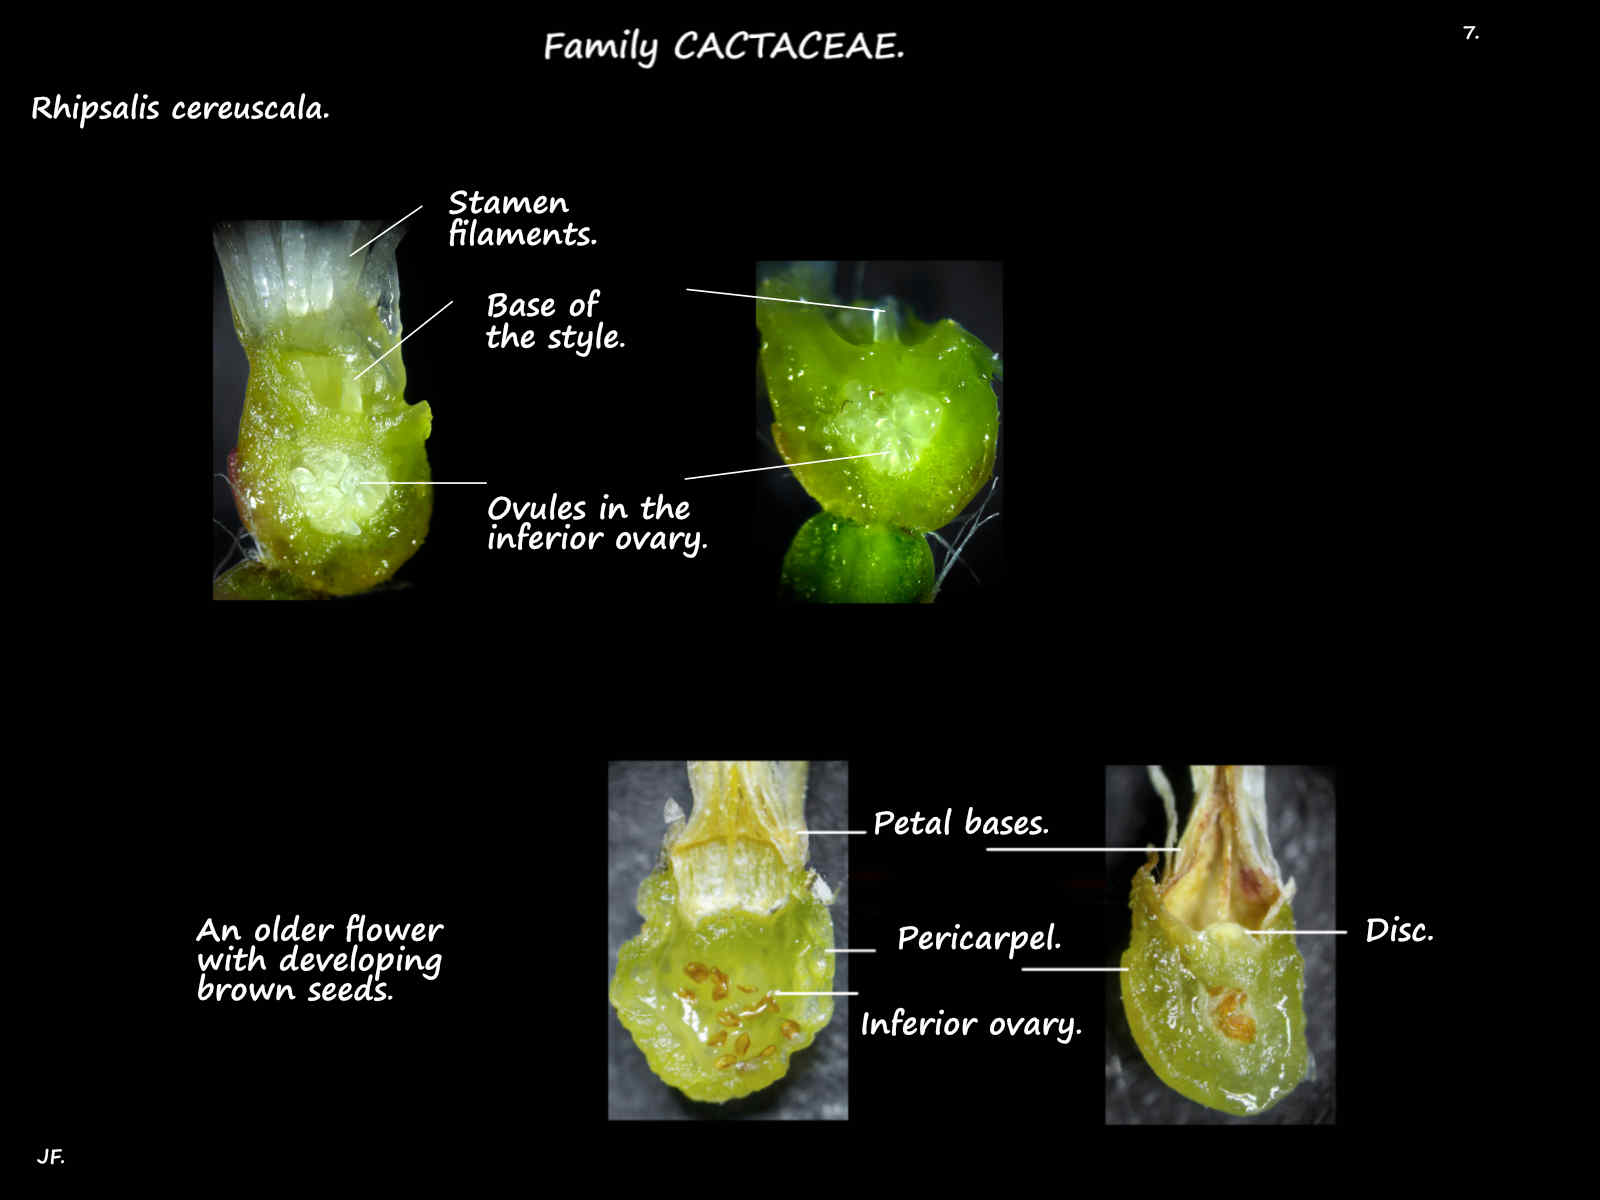 7 Vertical sections of Rhipsalis cereuscala ovaries